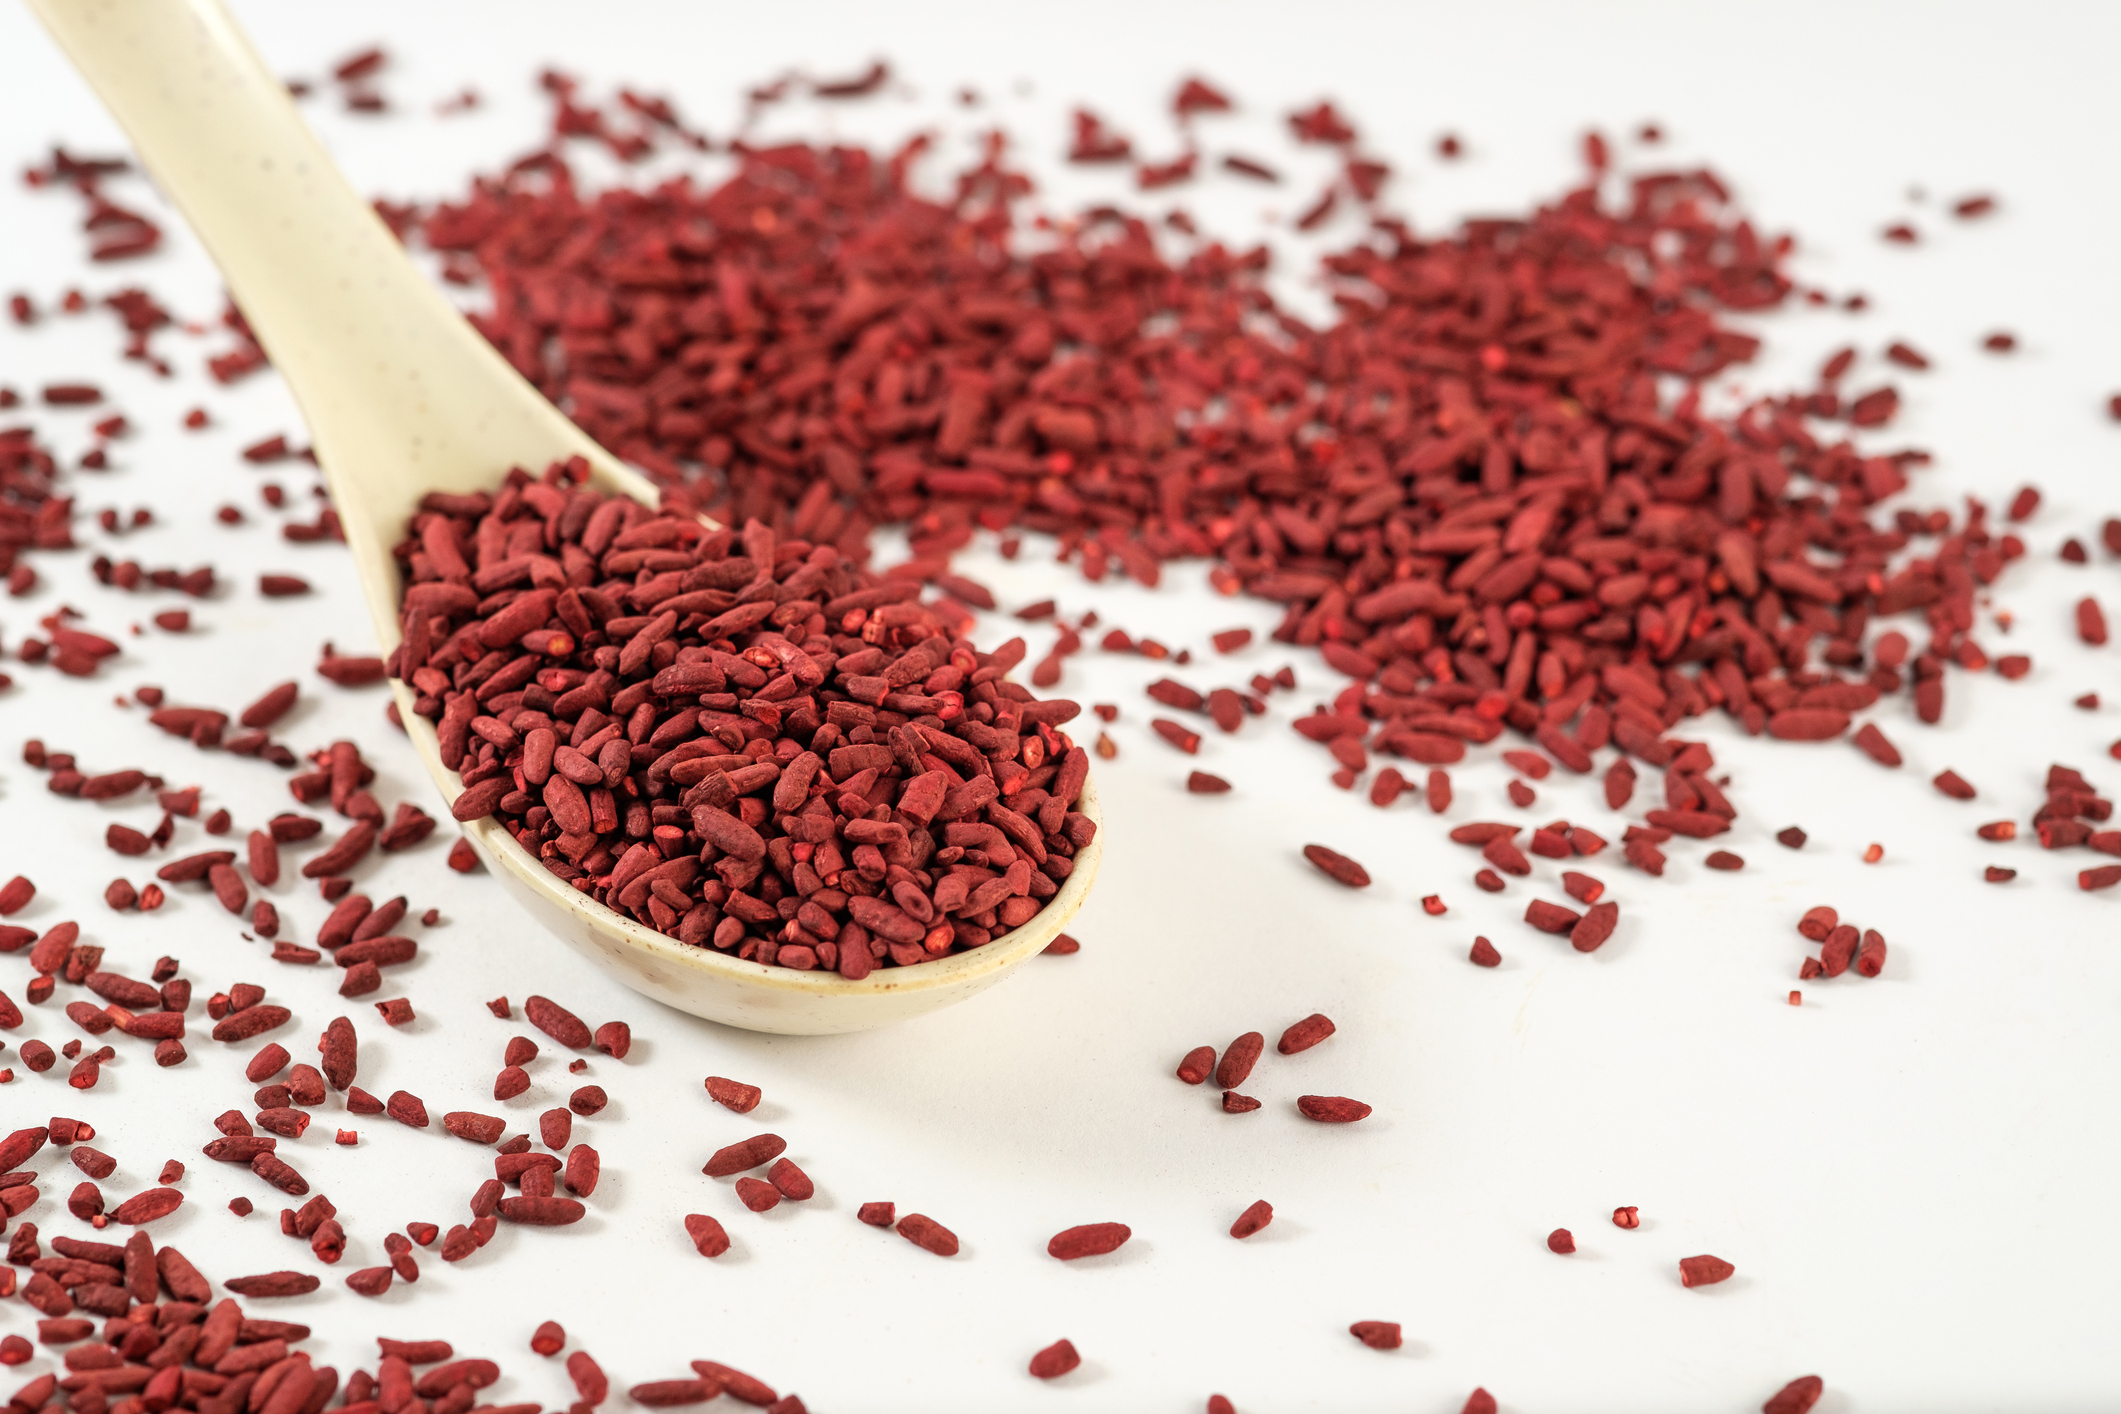 Bliv overrasket håber hjerte Does Red Yeast Rice Actually Help Lower Cholesterol?